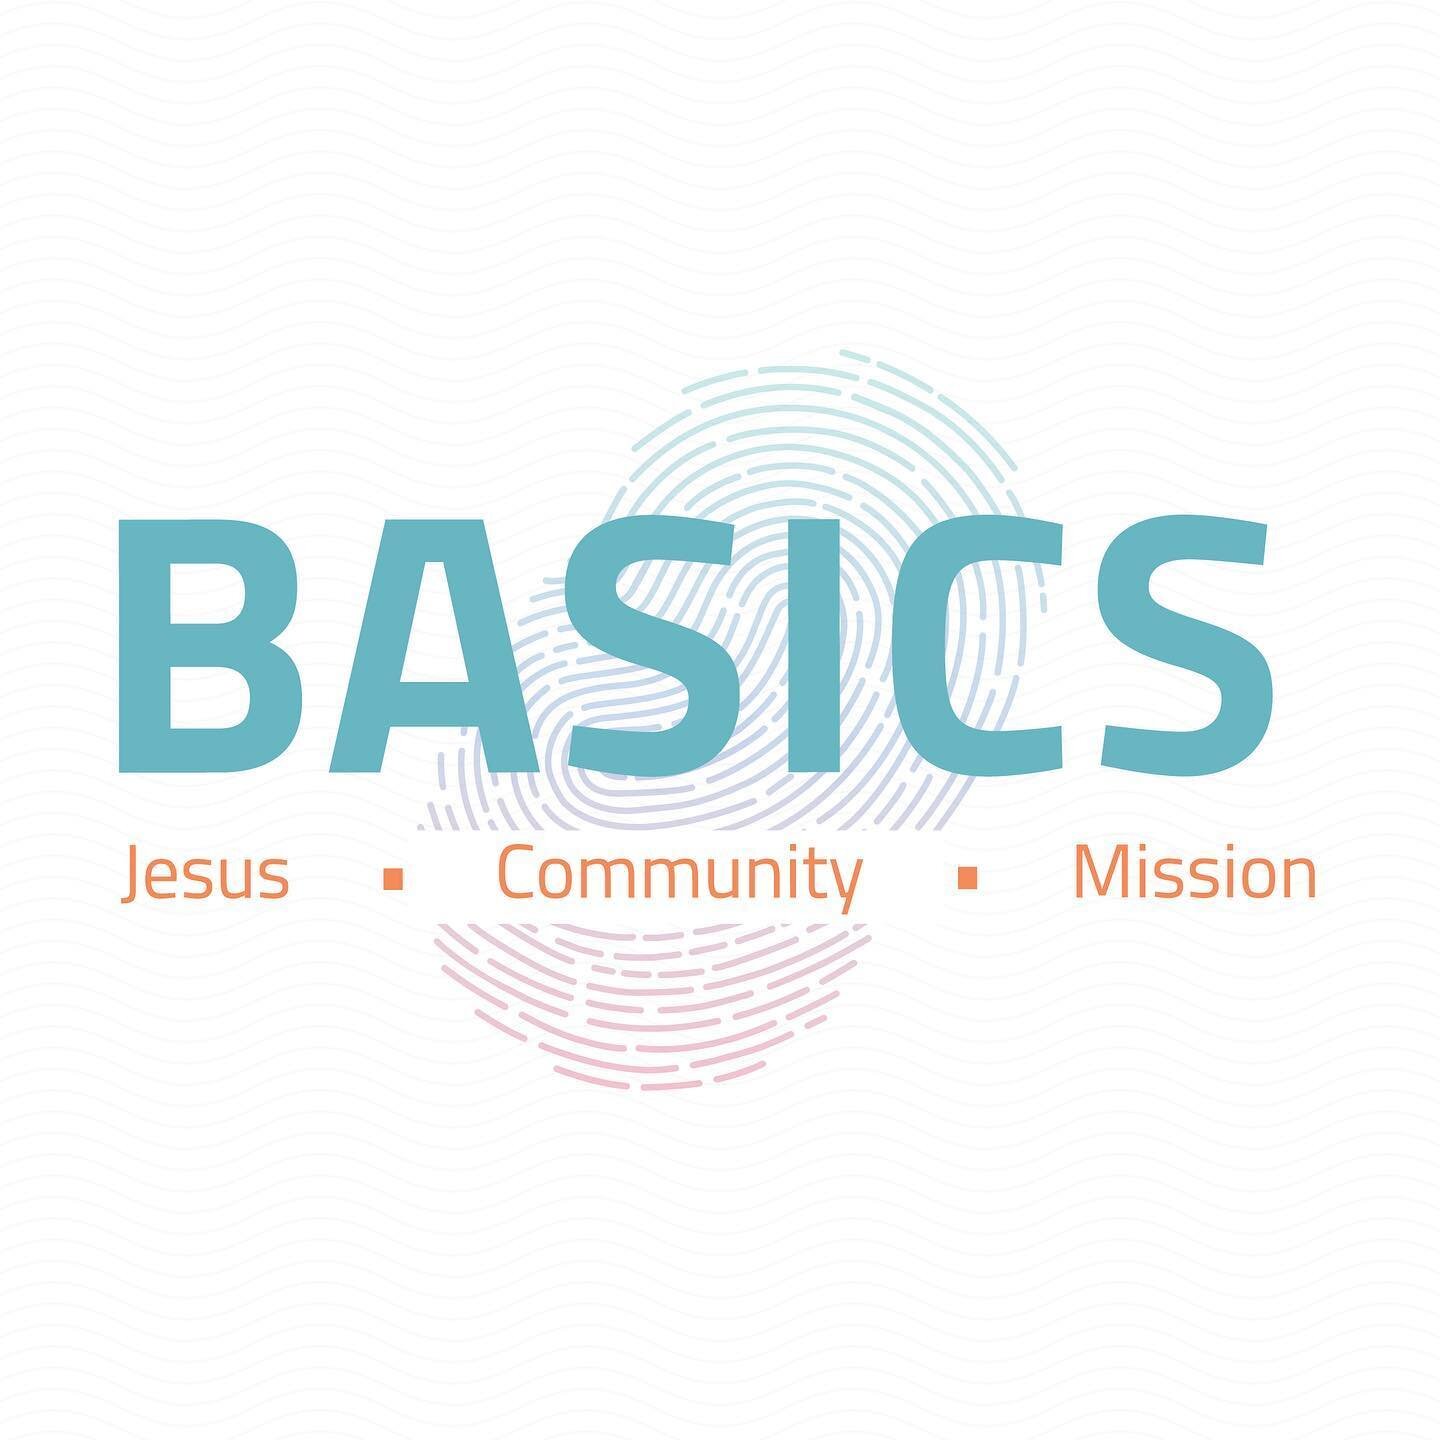 A well-loved football coach, Bill Cowher, said, "you go back to fundamentals when things go awry (wrong)."⁣
⁣
Over the course of the summer, we'll revisit and rehearse the fundamentals of what we're about as a church through a series called BASICS.⁣
